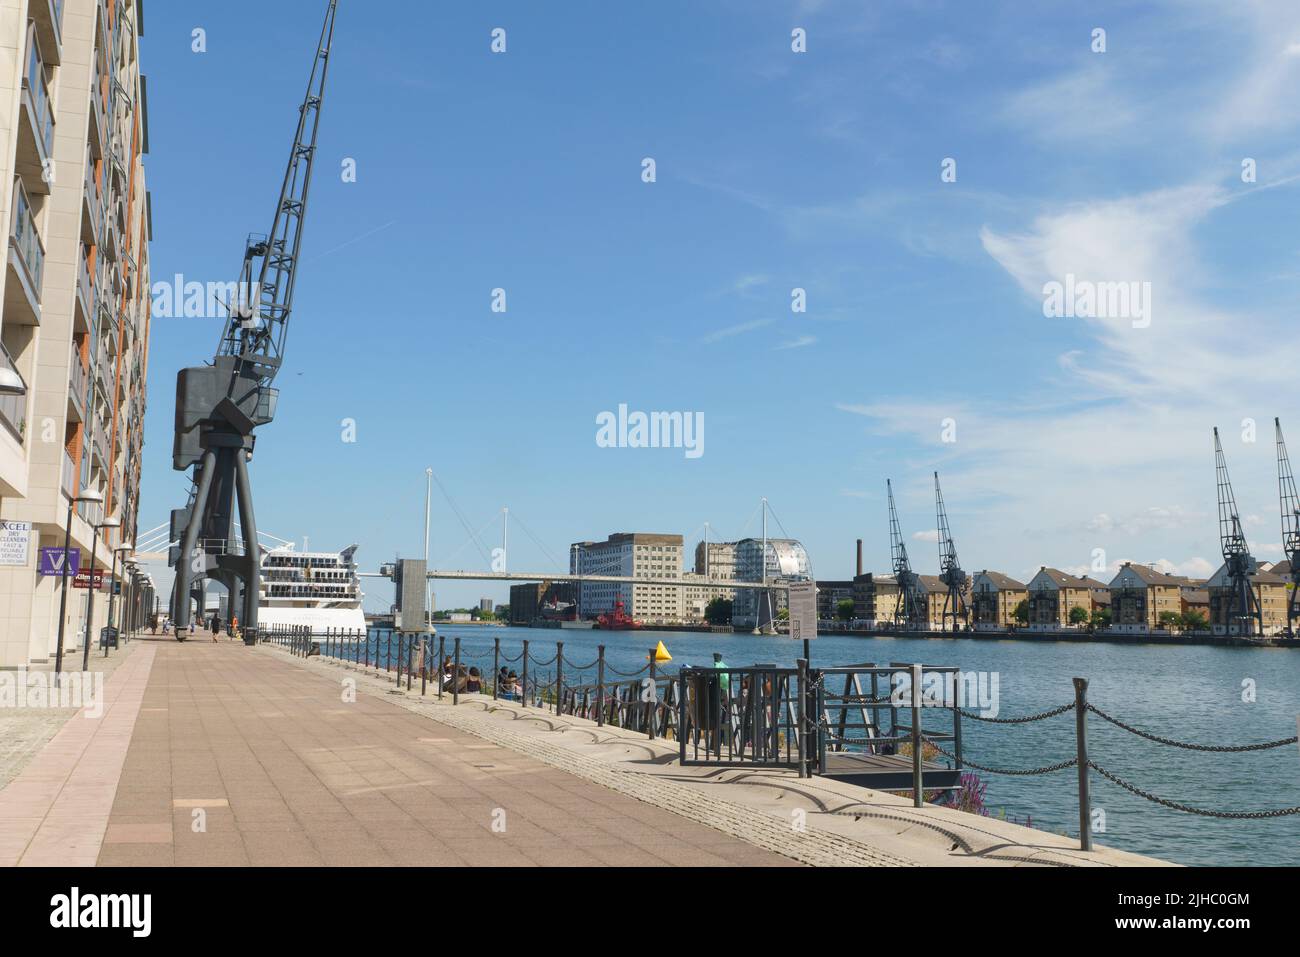 Wharfside - Royal Victoria Dock with views across the dock, and showing the Sunborn London Yacht Hotel. Stock Photo